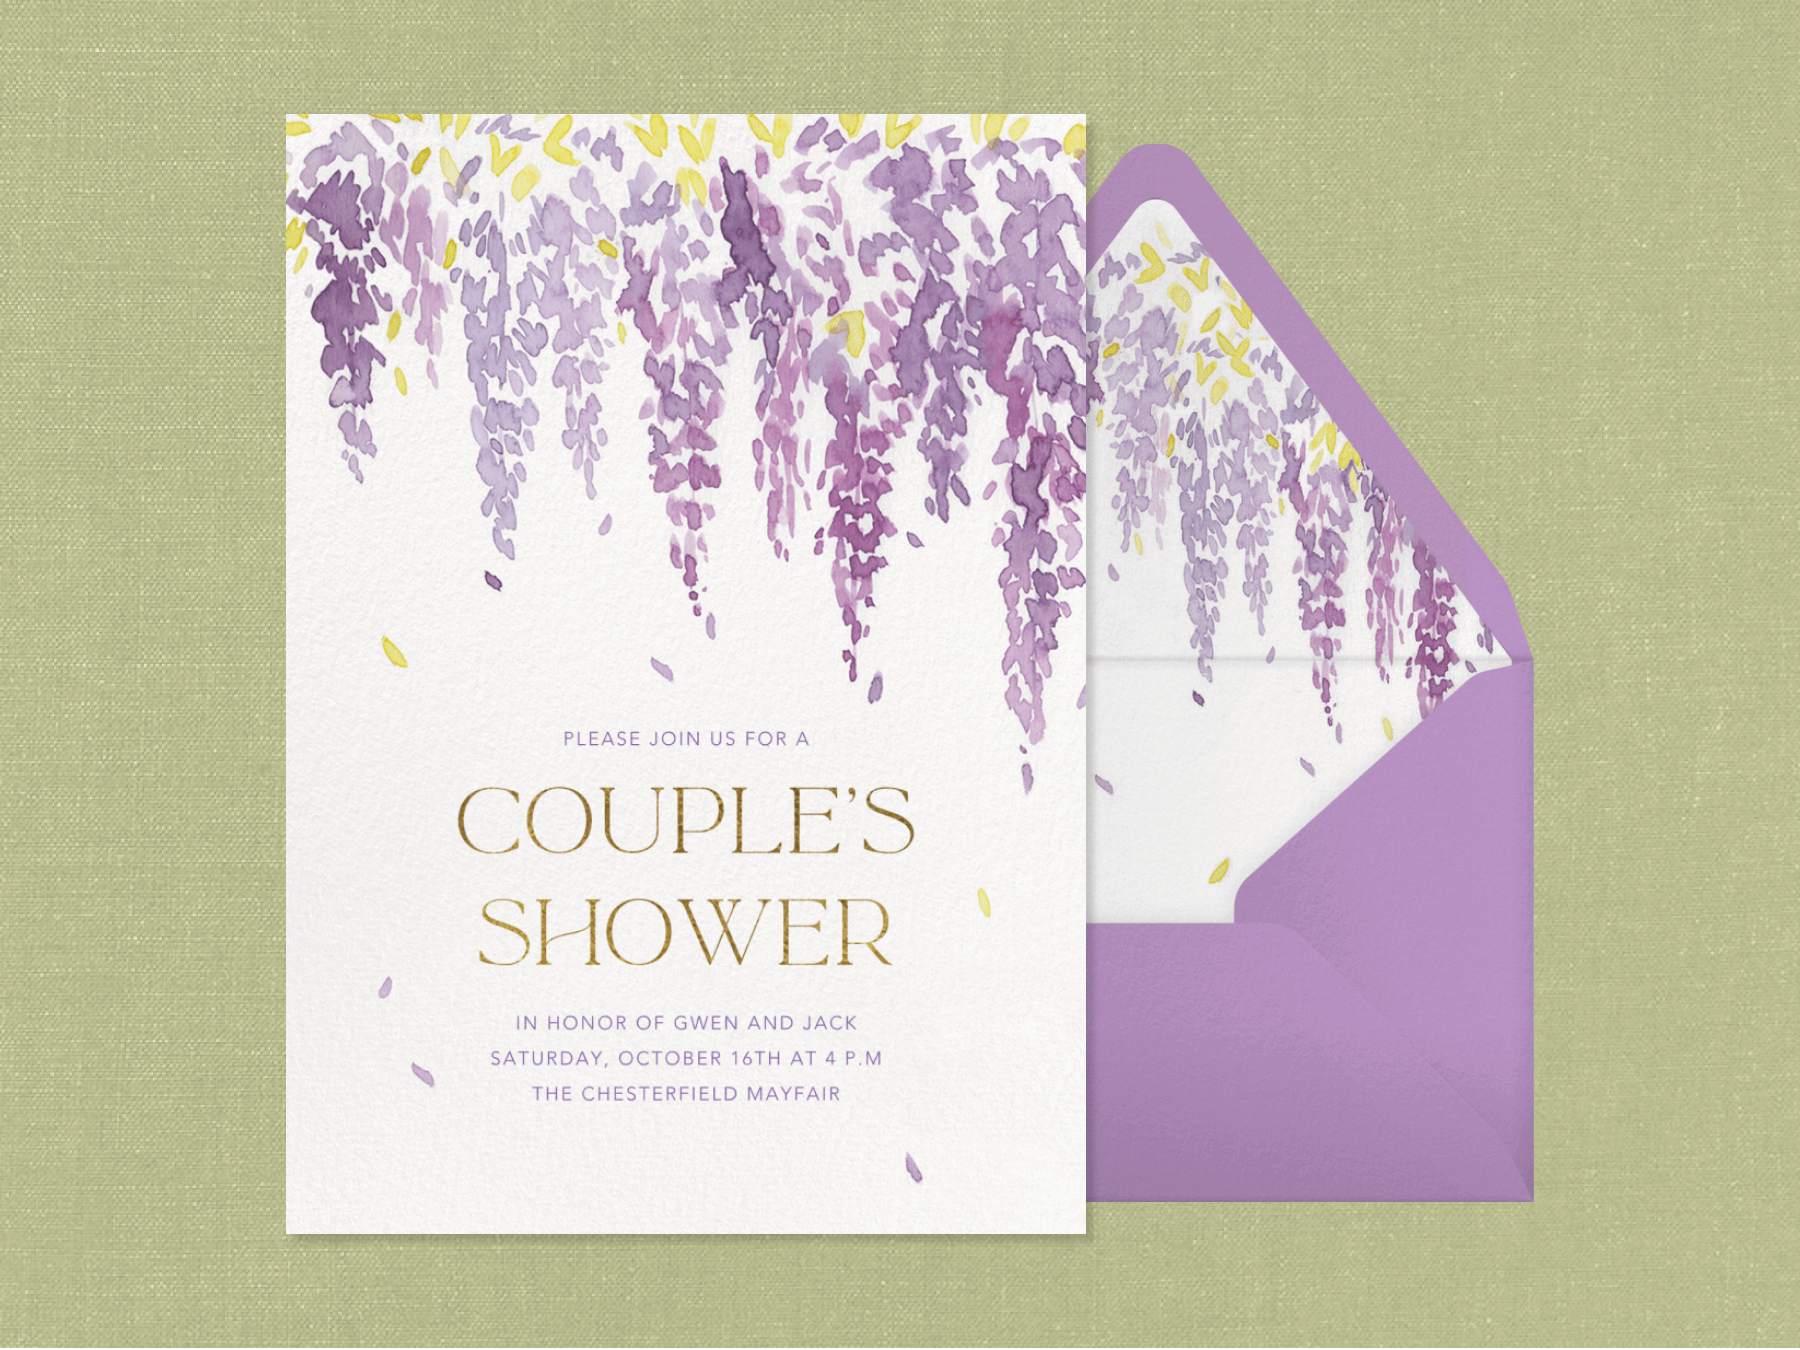 A bridal shower invitation with purple watercolor wisteria flowers falling from the top by a matching purple envelope.